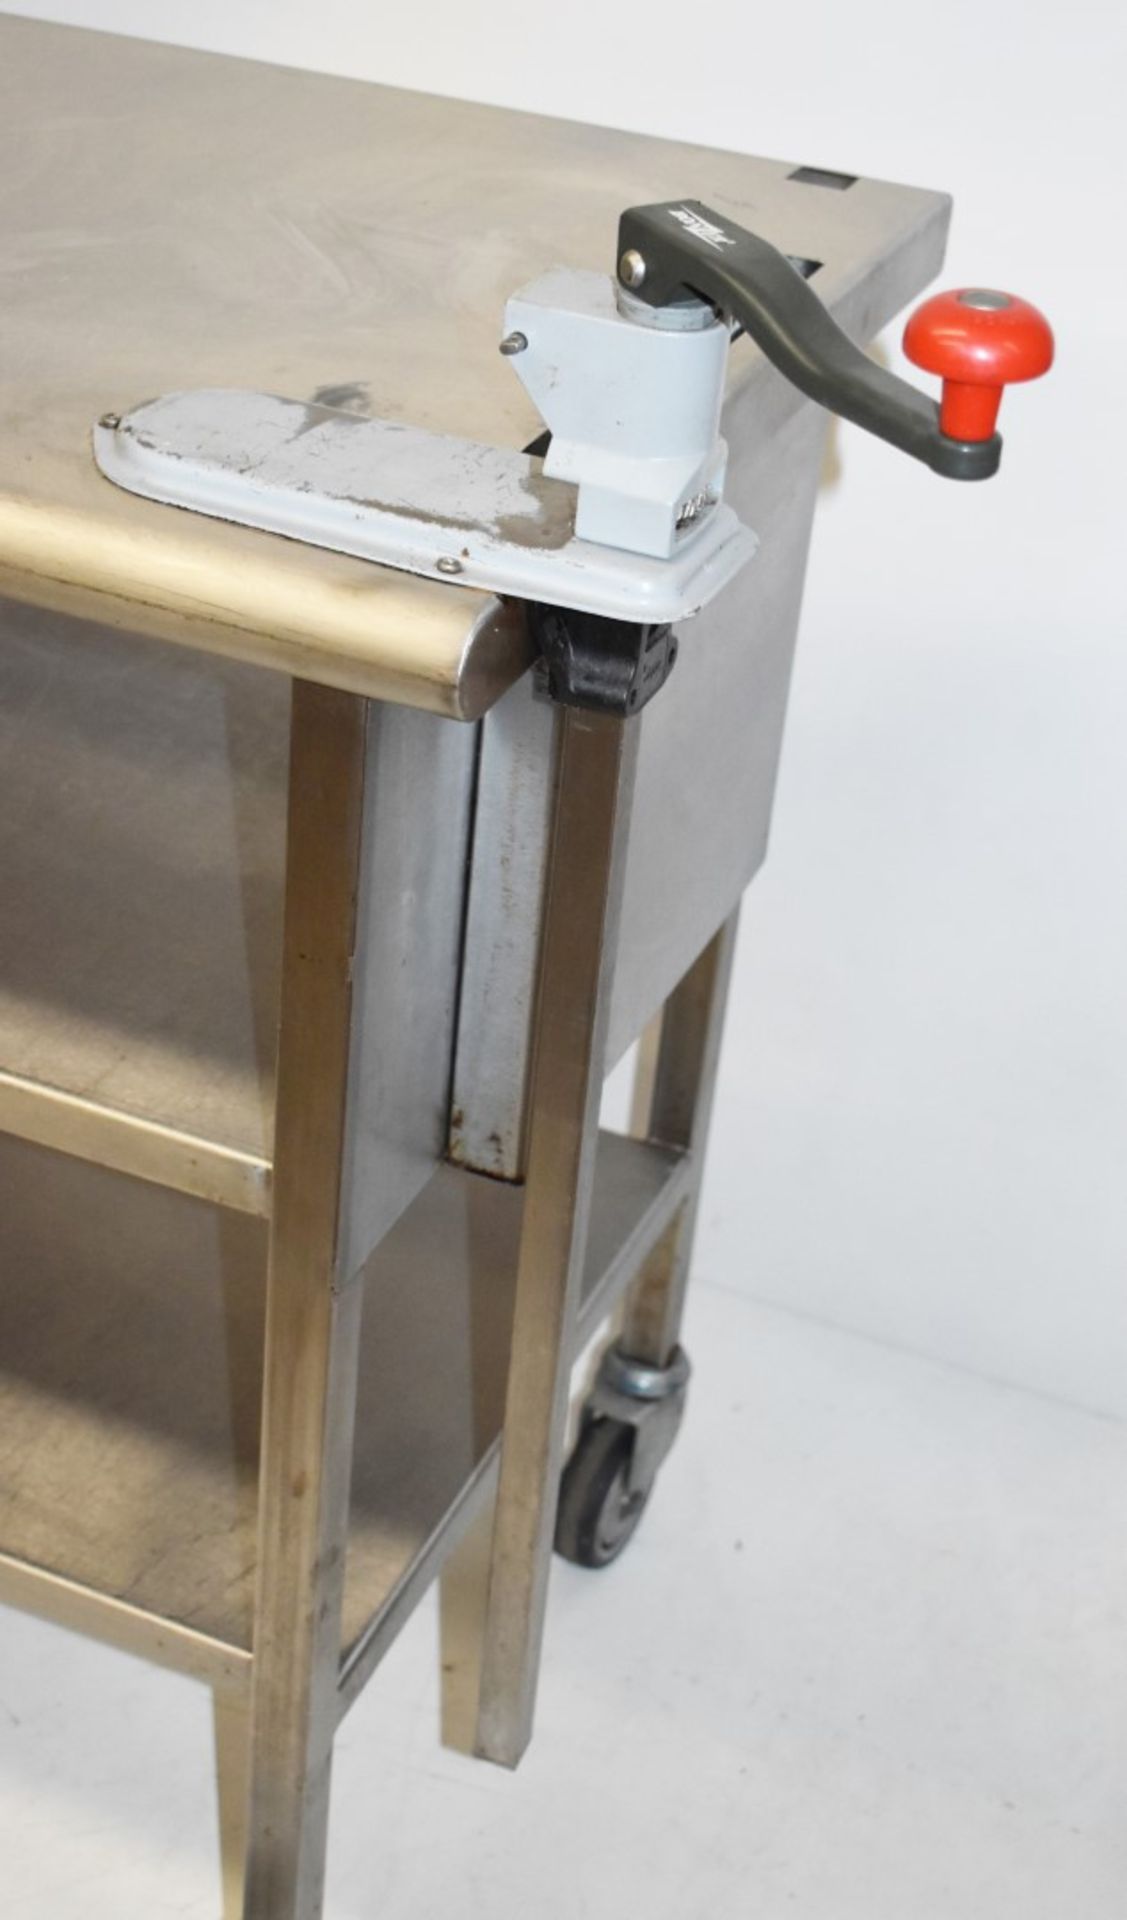 1 x Stainless Steel Prep Bench With Undershelves, Castors and Commercial Tin Opened - H87.5 x W160 x - Image 3 of 5